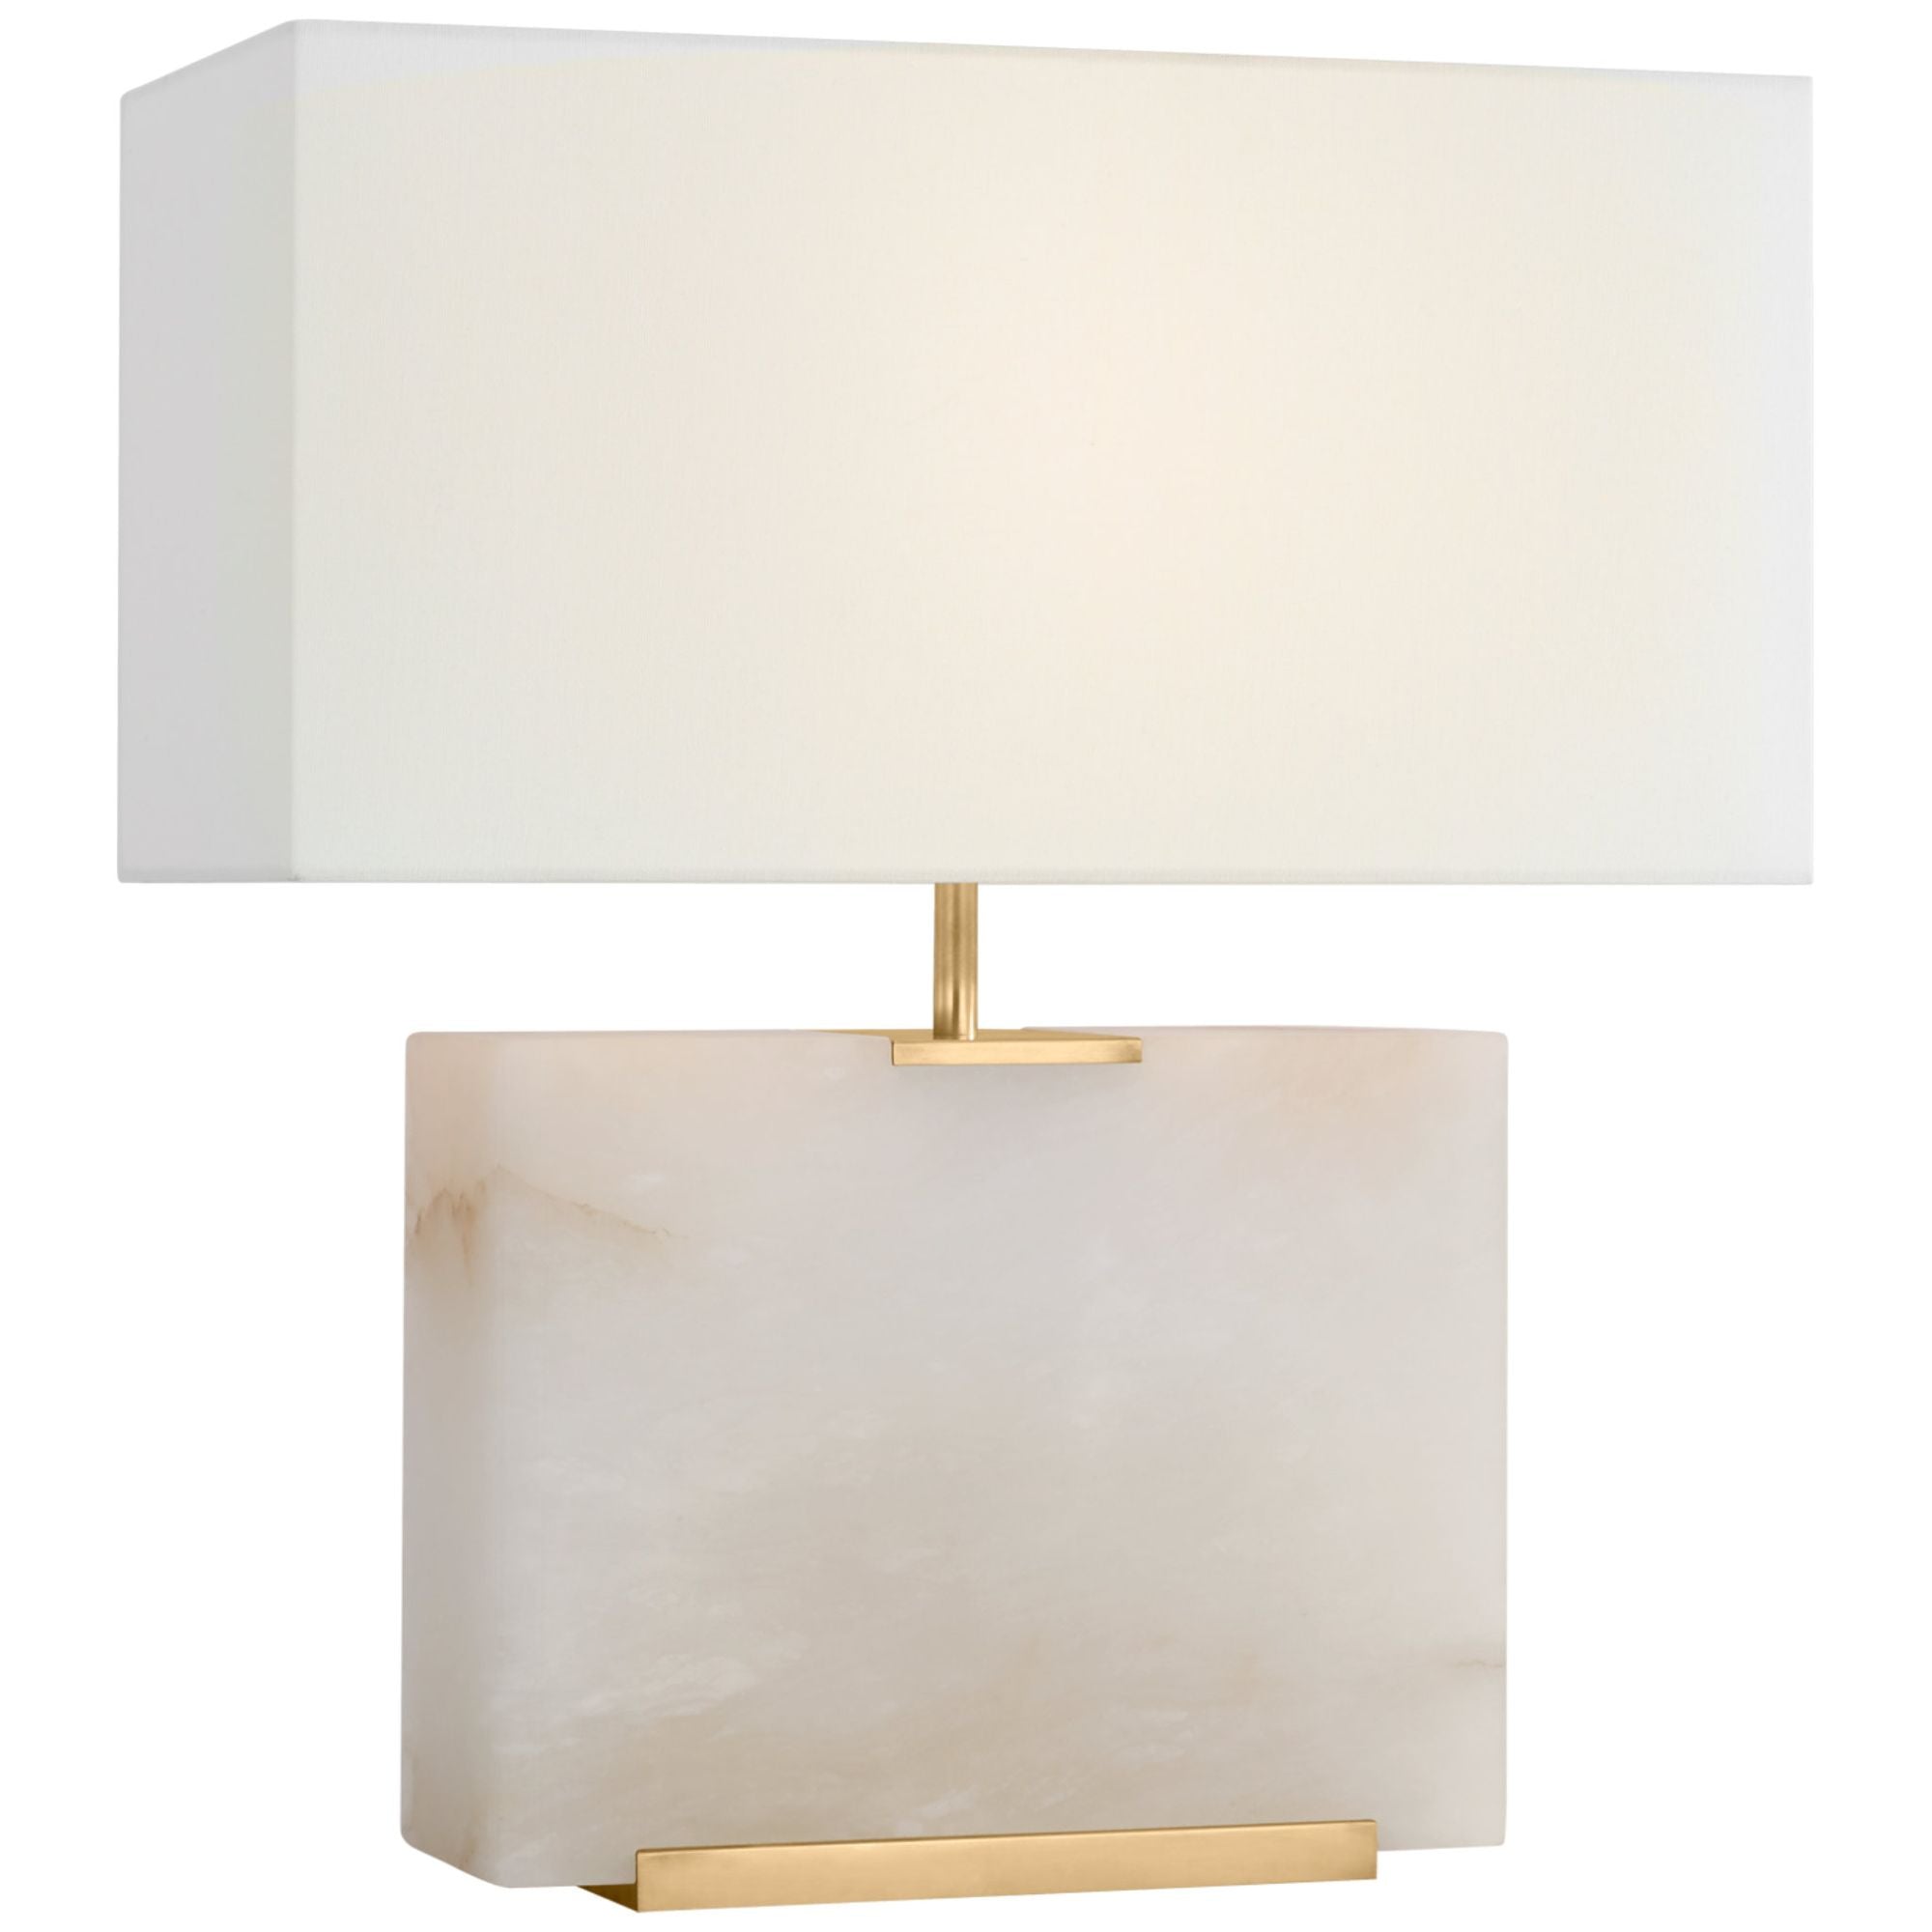 Ian K. Fowler Matero Medium Table Lamp in Alabaster with Linen Shade